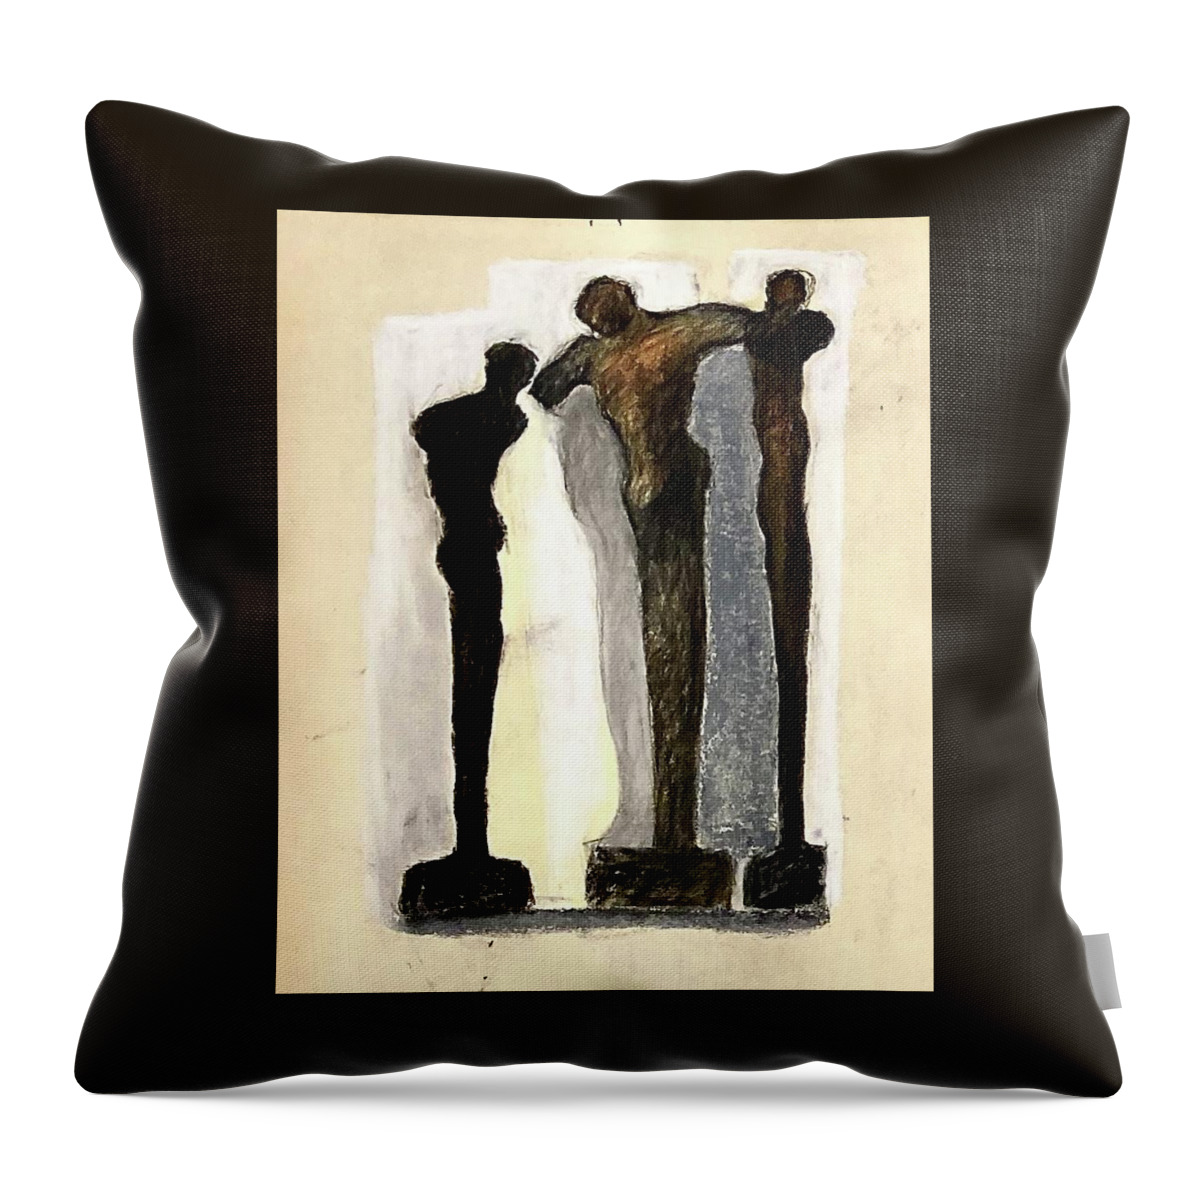 Three Figures Throw Pillow featuring the drawing Three figures by David Euler